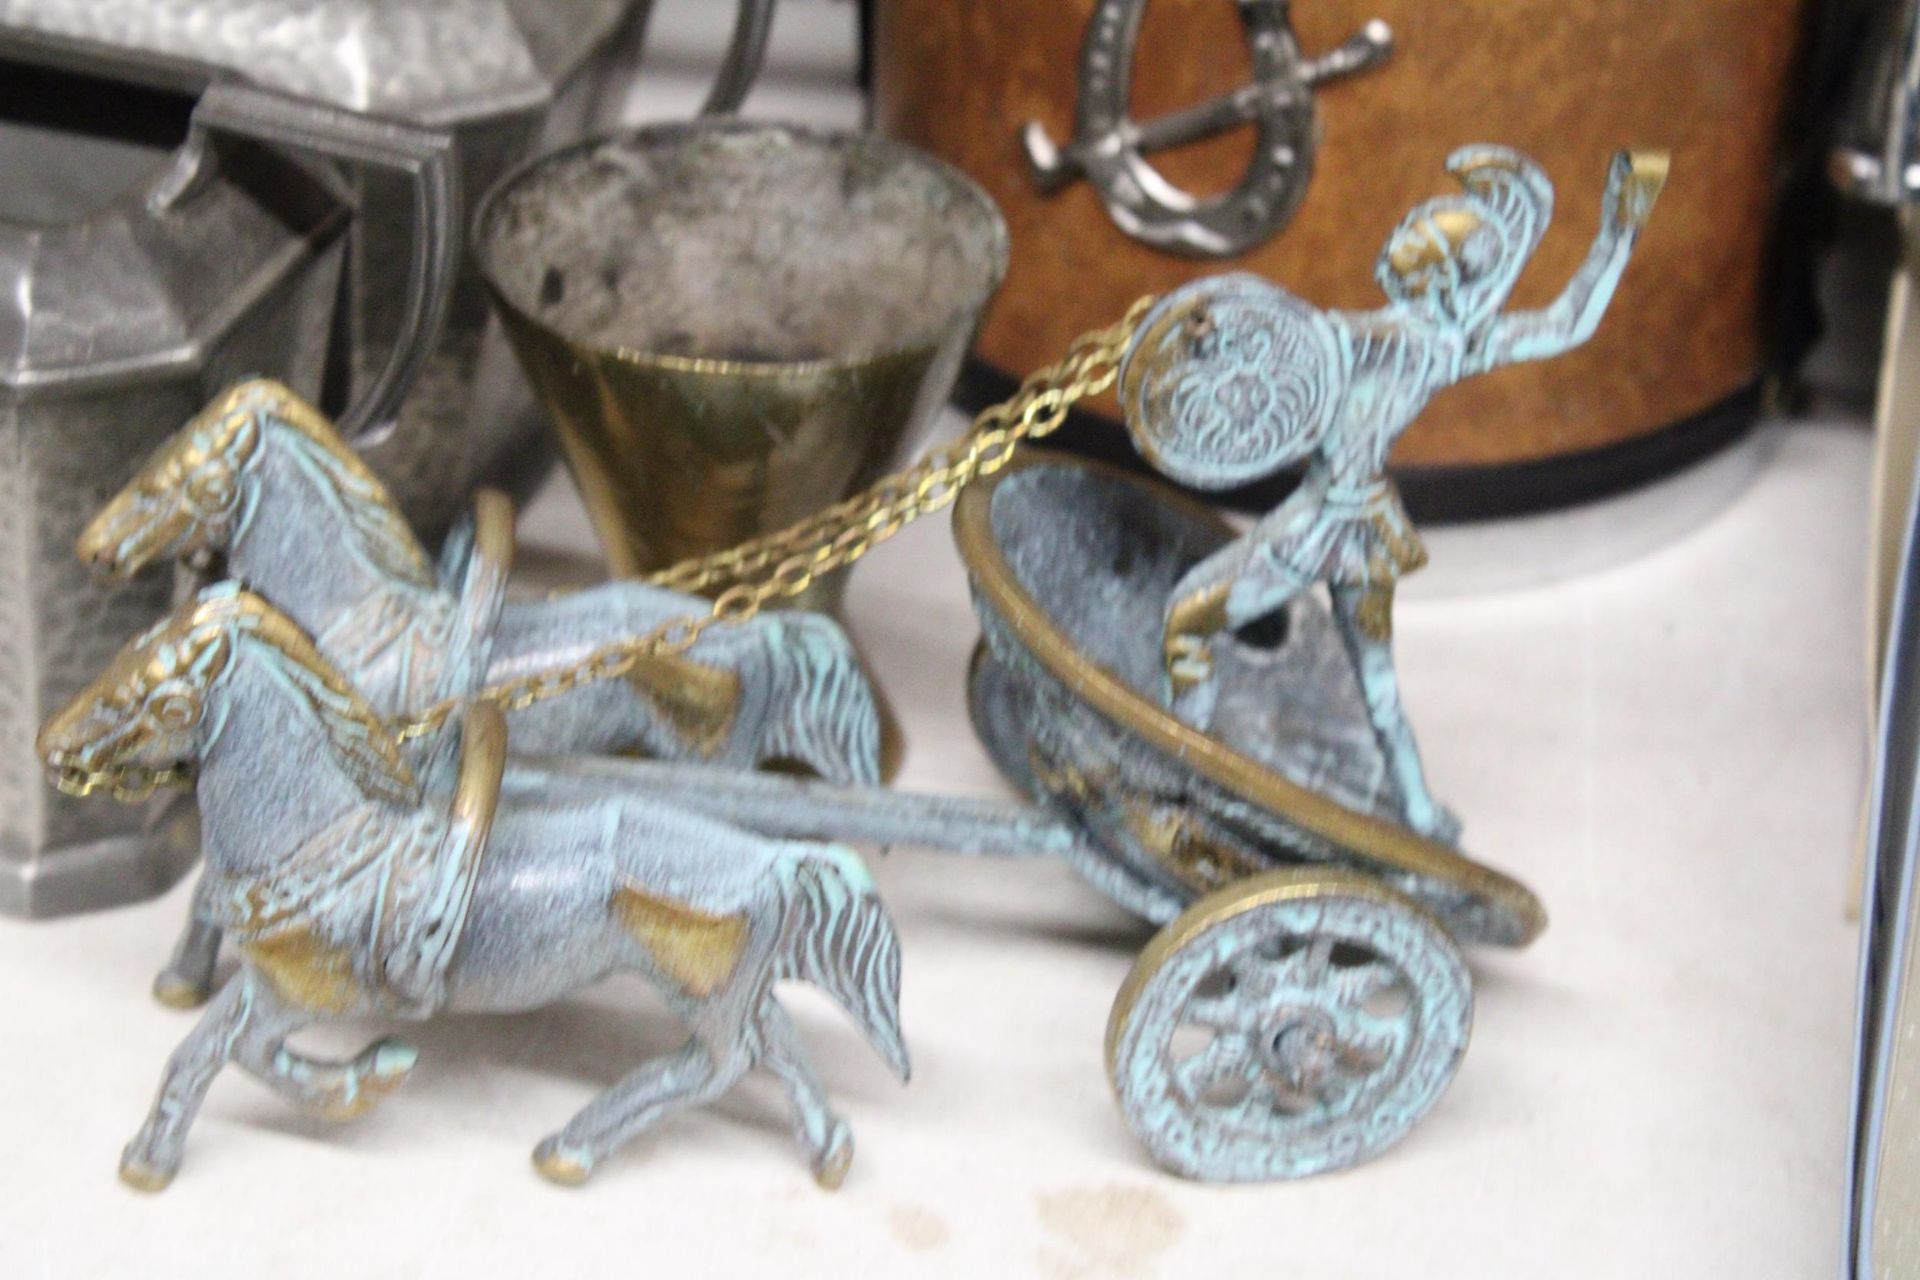 A MIXED LOT TO INCLUDE VINTAGE BOXED TABLESPOONS, HAMMERED PEWTER WARE, A 1970'S HORSE HEAD ICE - Image 6 of 6